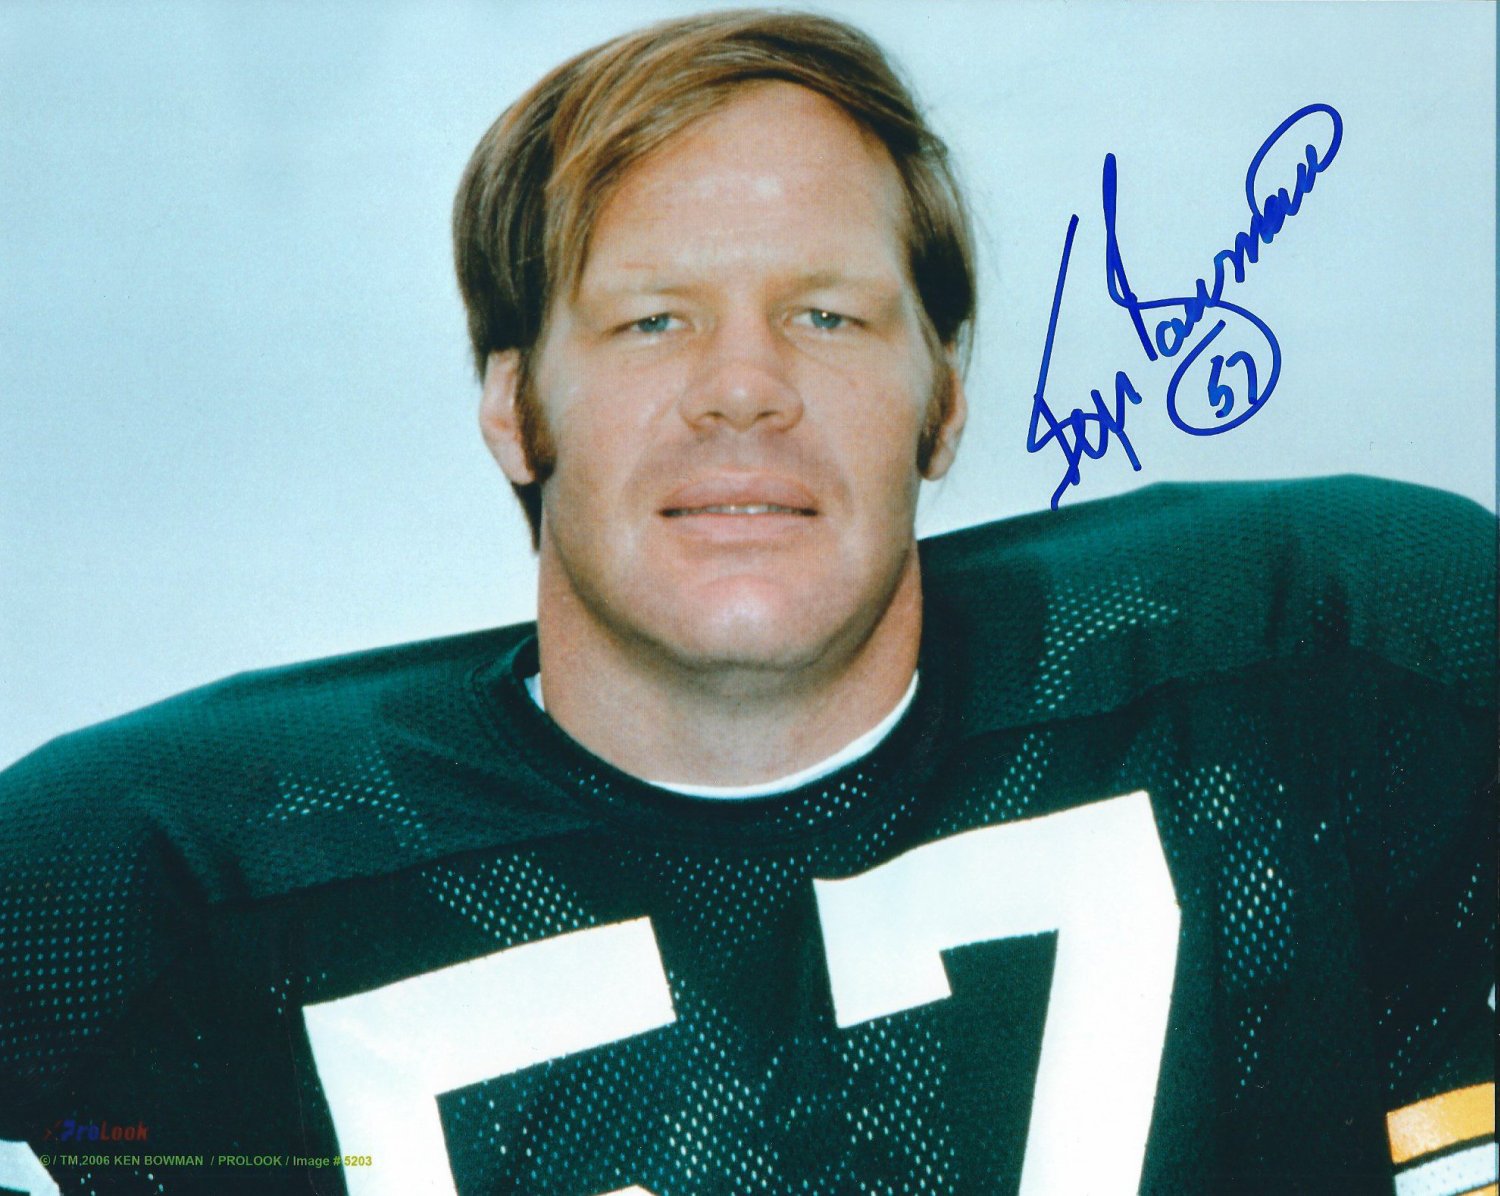 Autographed Signed Ken Bowman 8x10 Green Bay Packers Photo - Certified Authentic